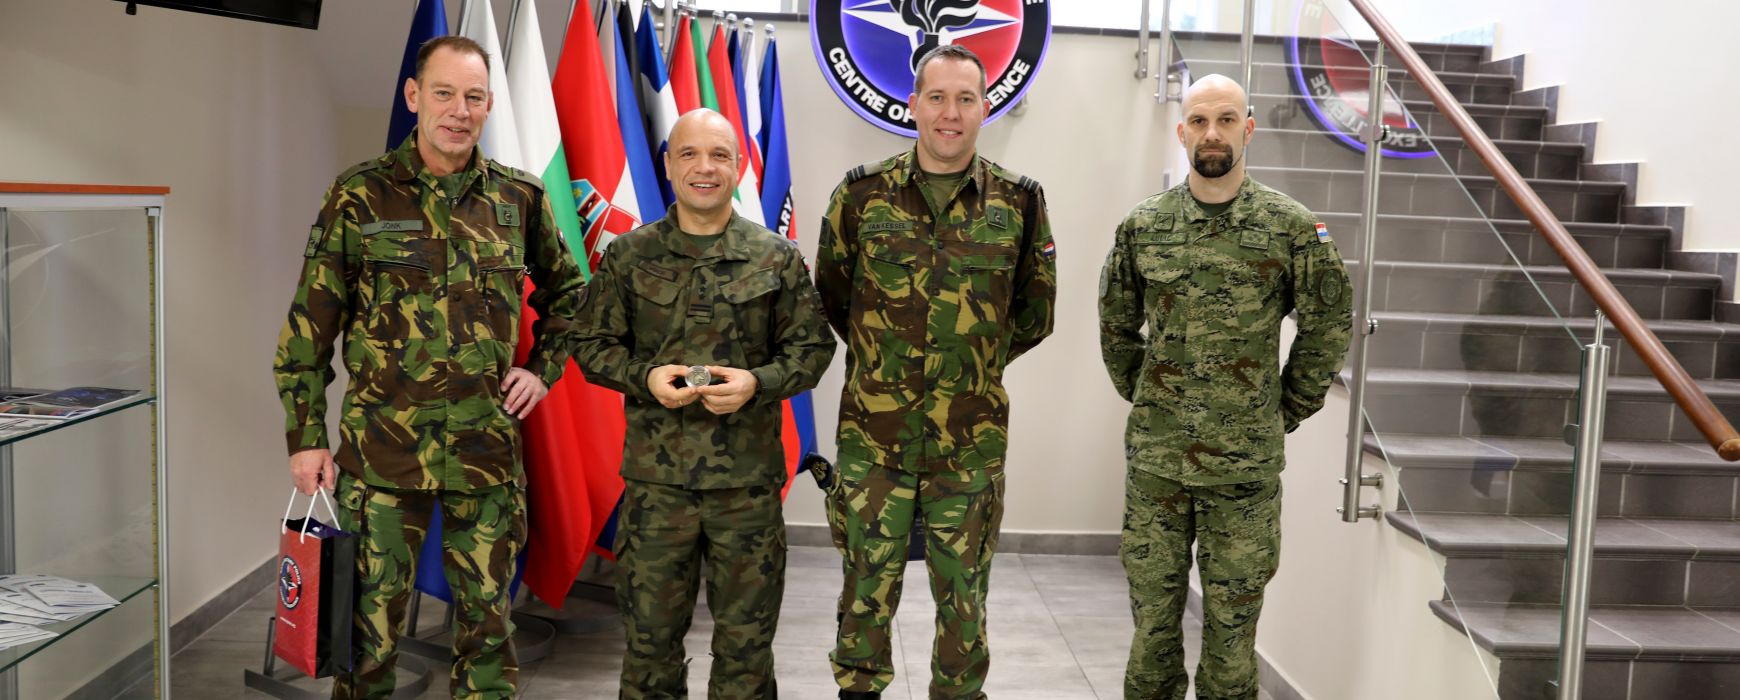 Working visit of the NATO Military Working Dogs Expert Panel Representatives